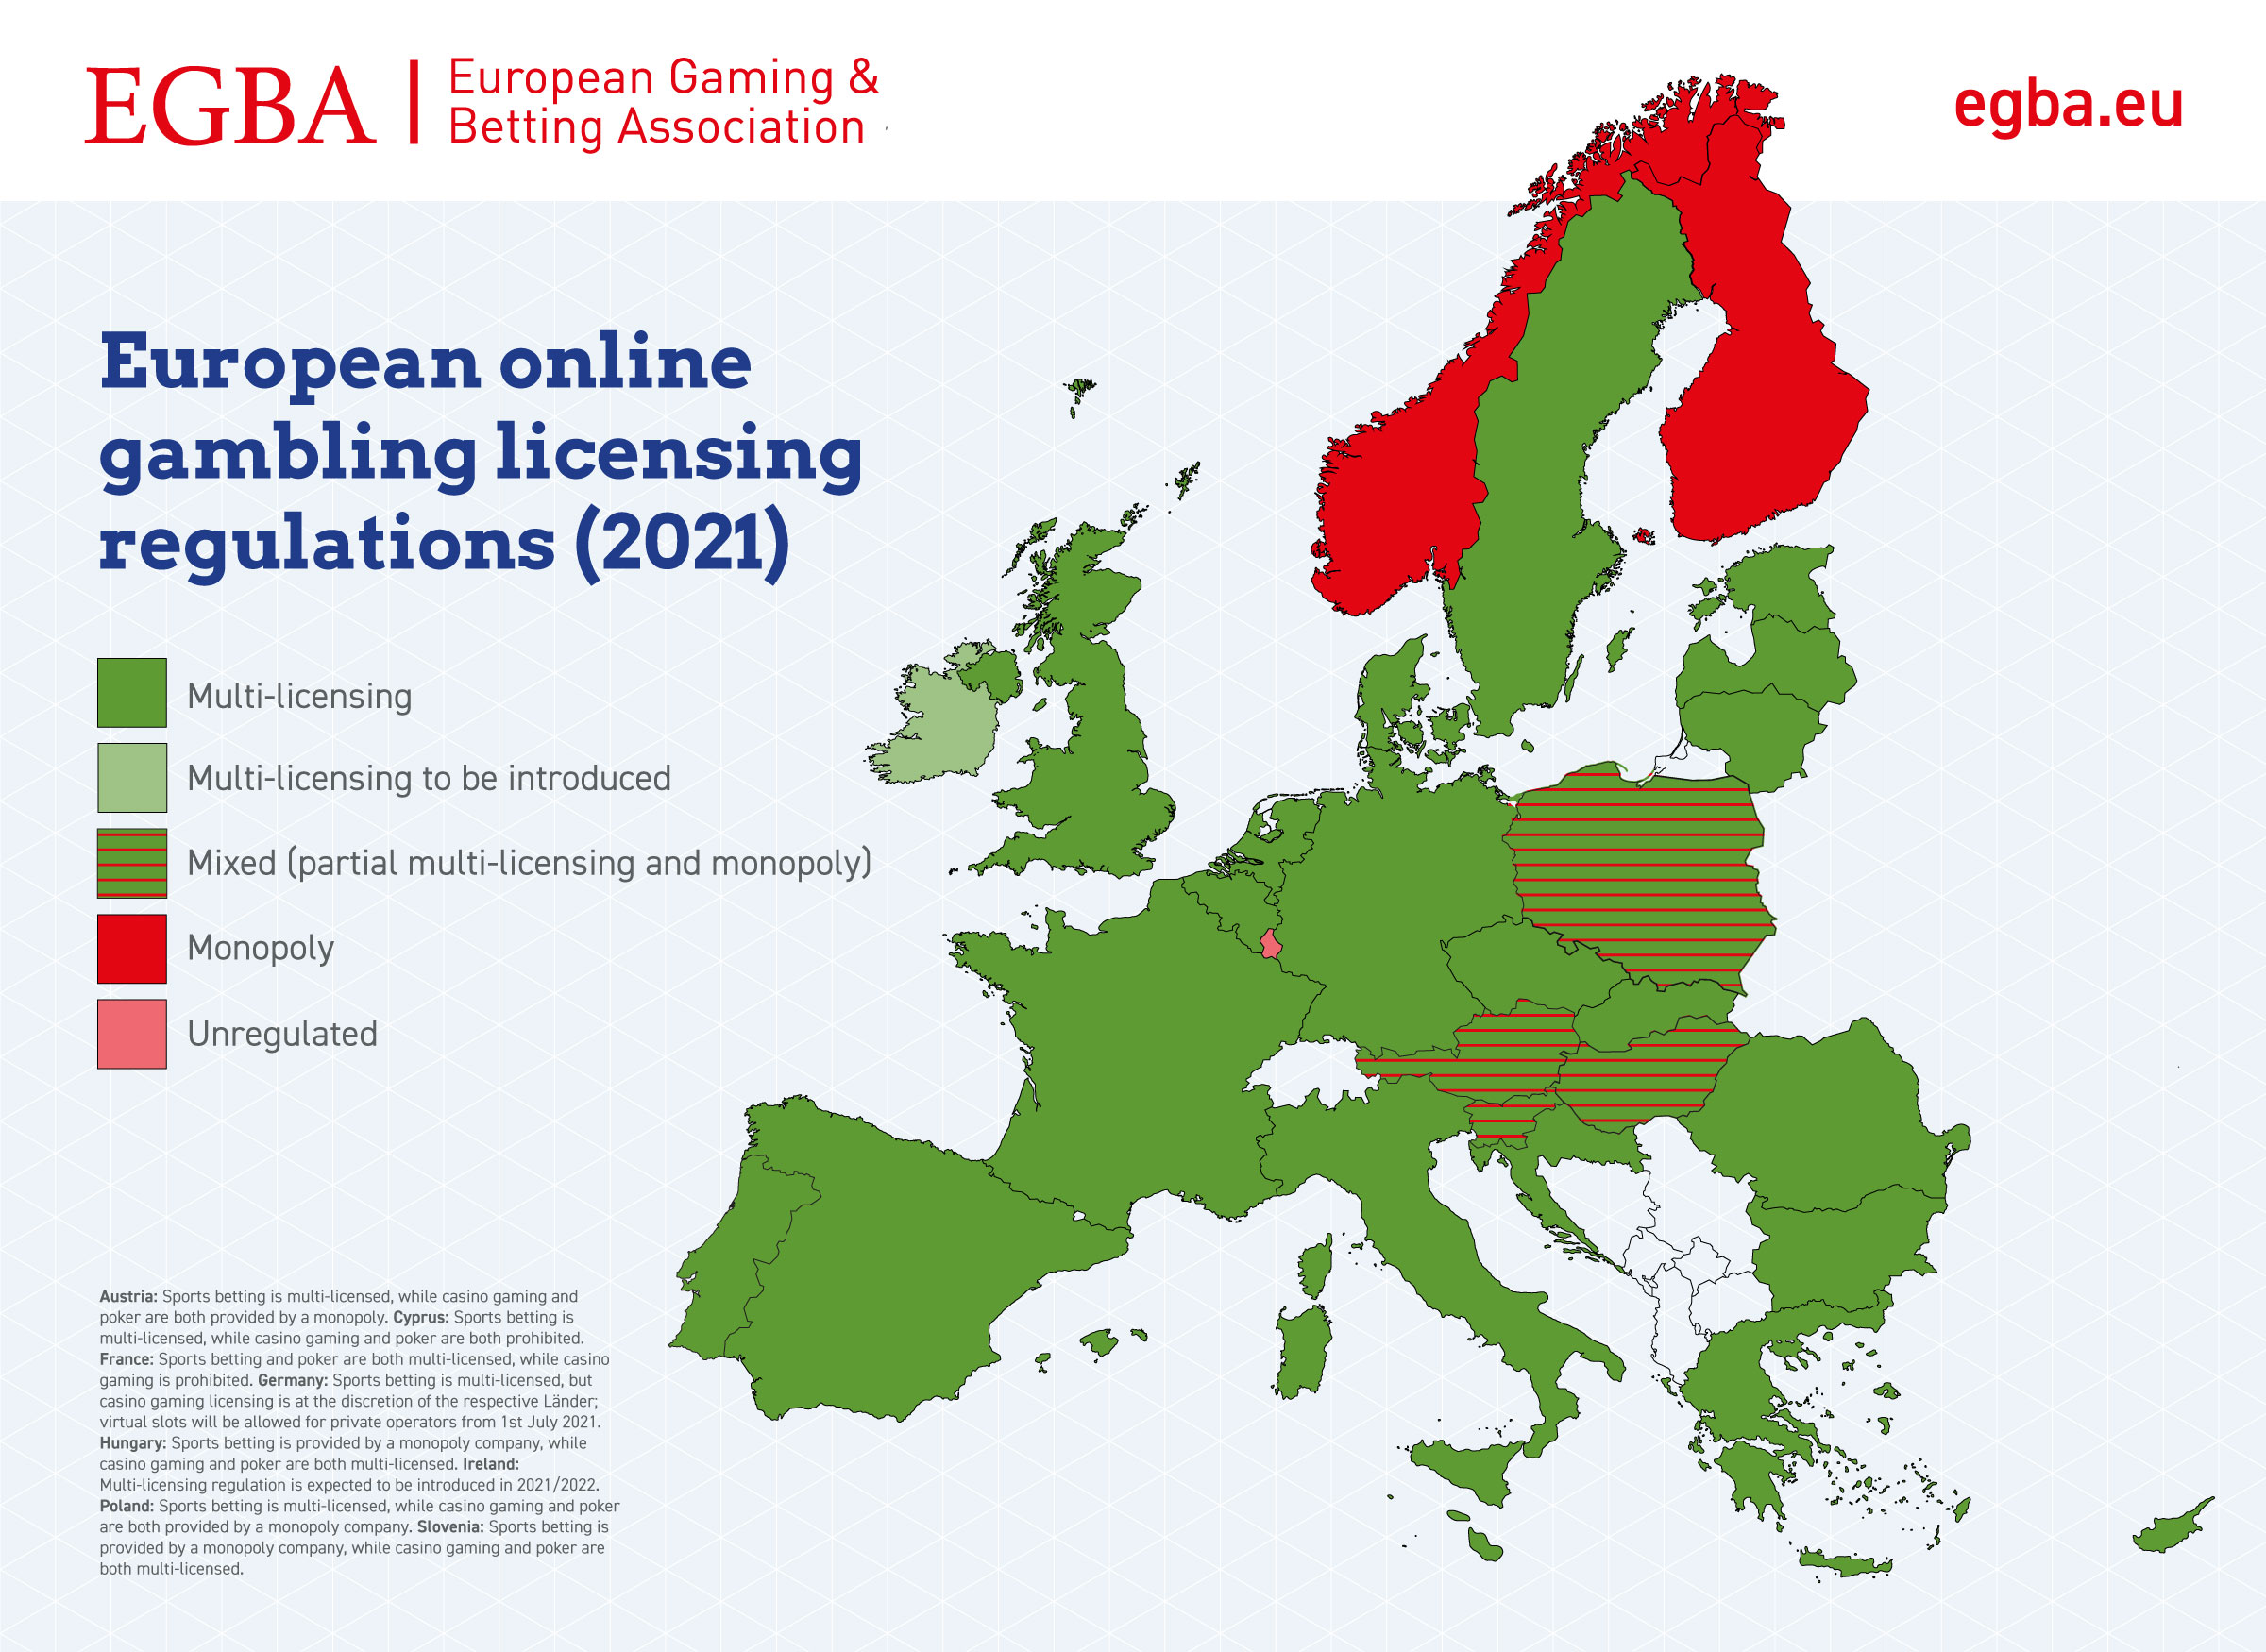 Analysis: Multi-licensing has become Europe's preferred online